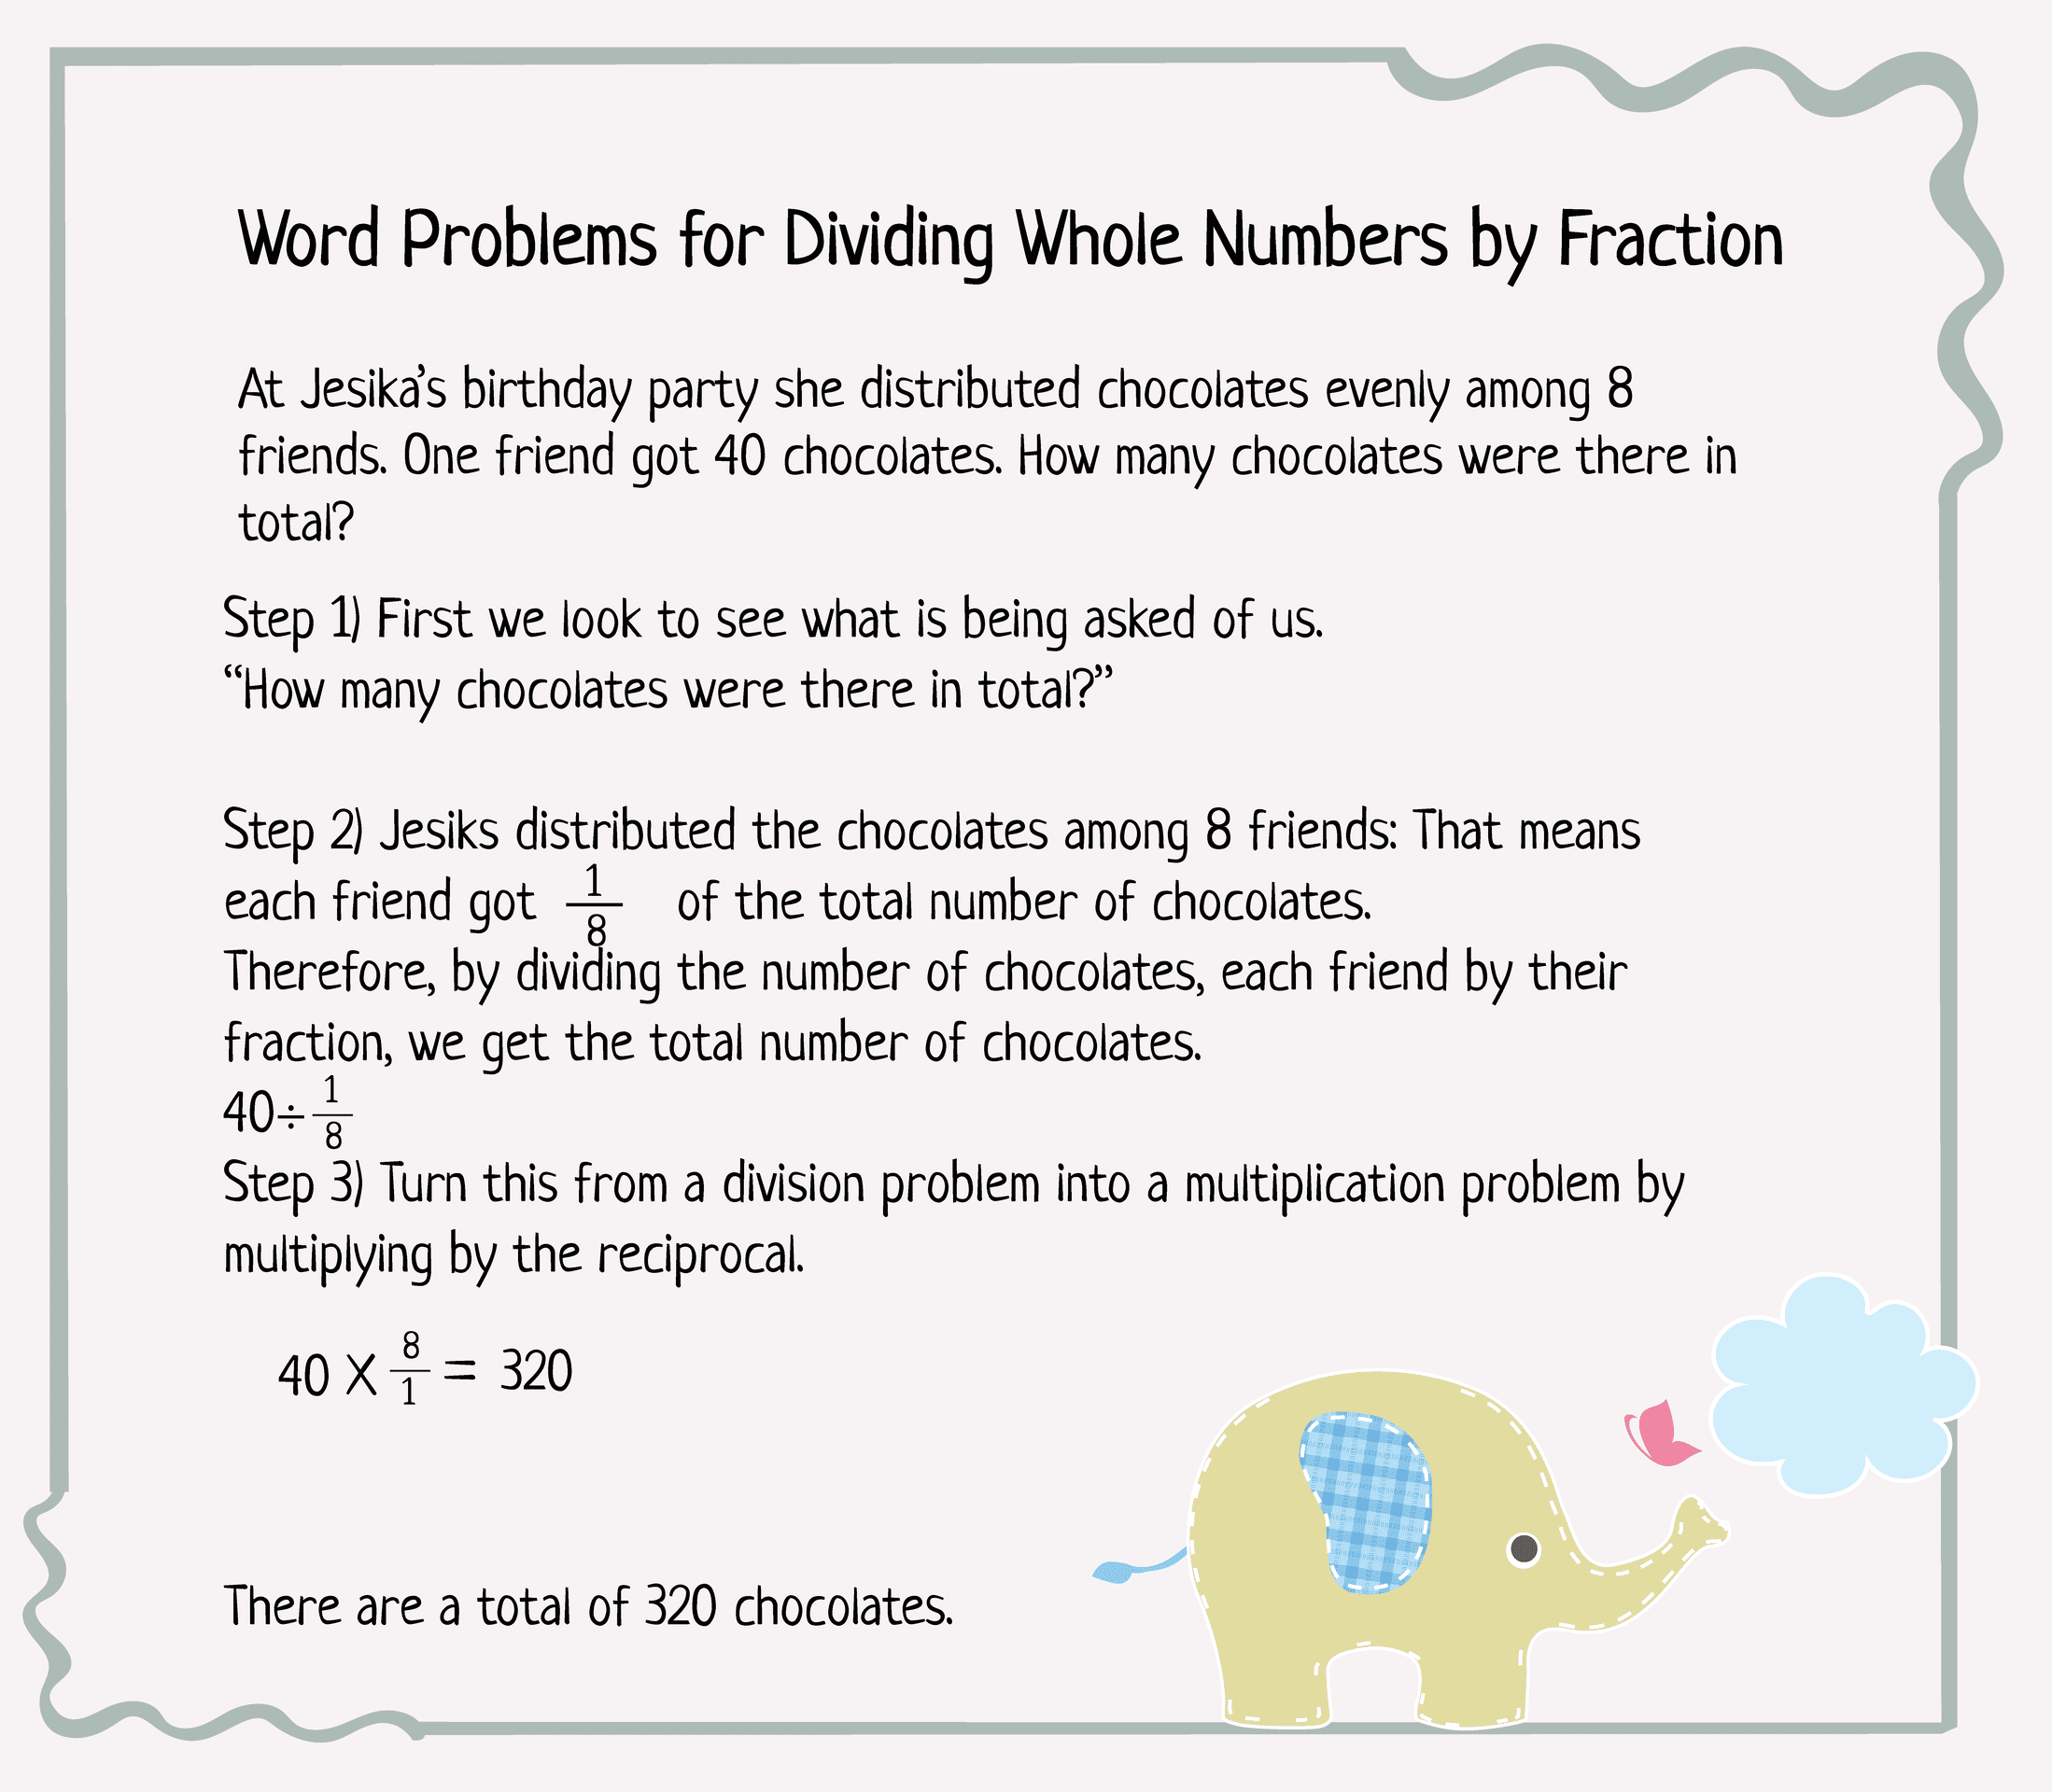 Explaing a word problem regarding dividing whole number by fractions_ 10-01